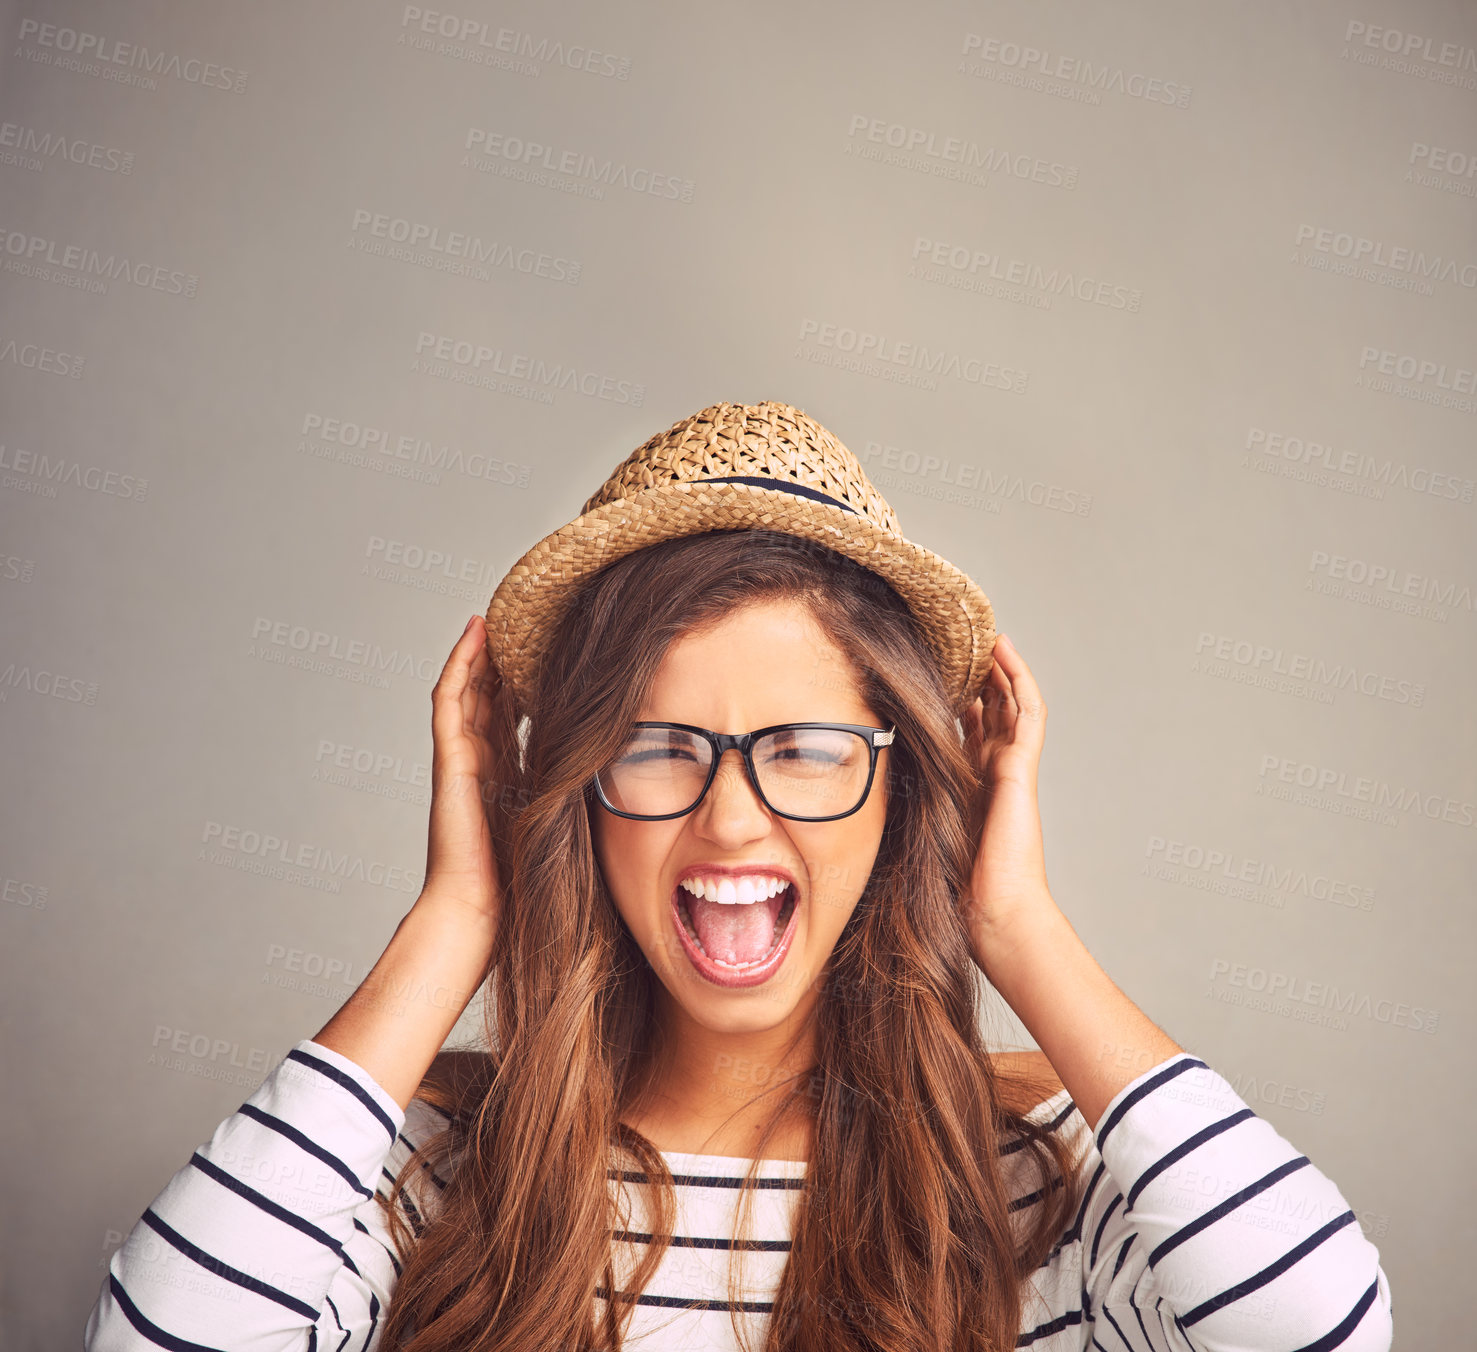 Buy stock photo Studio portrait of an attractive young woman screaming against a gray background